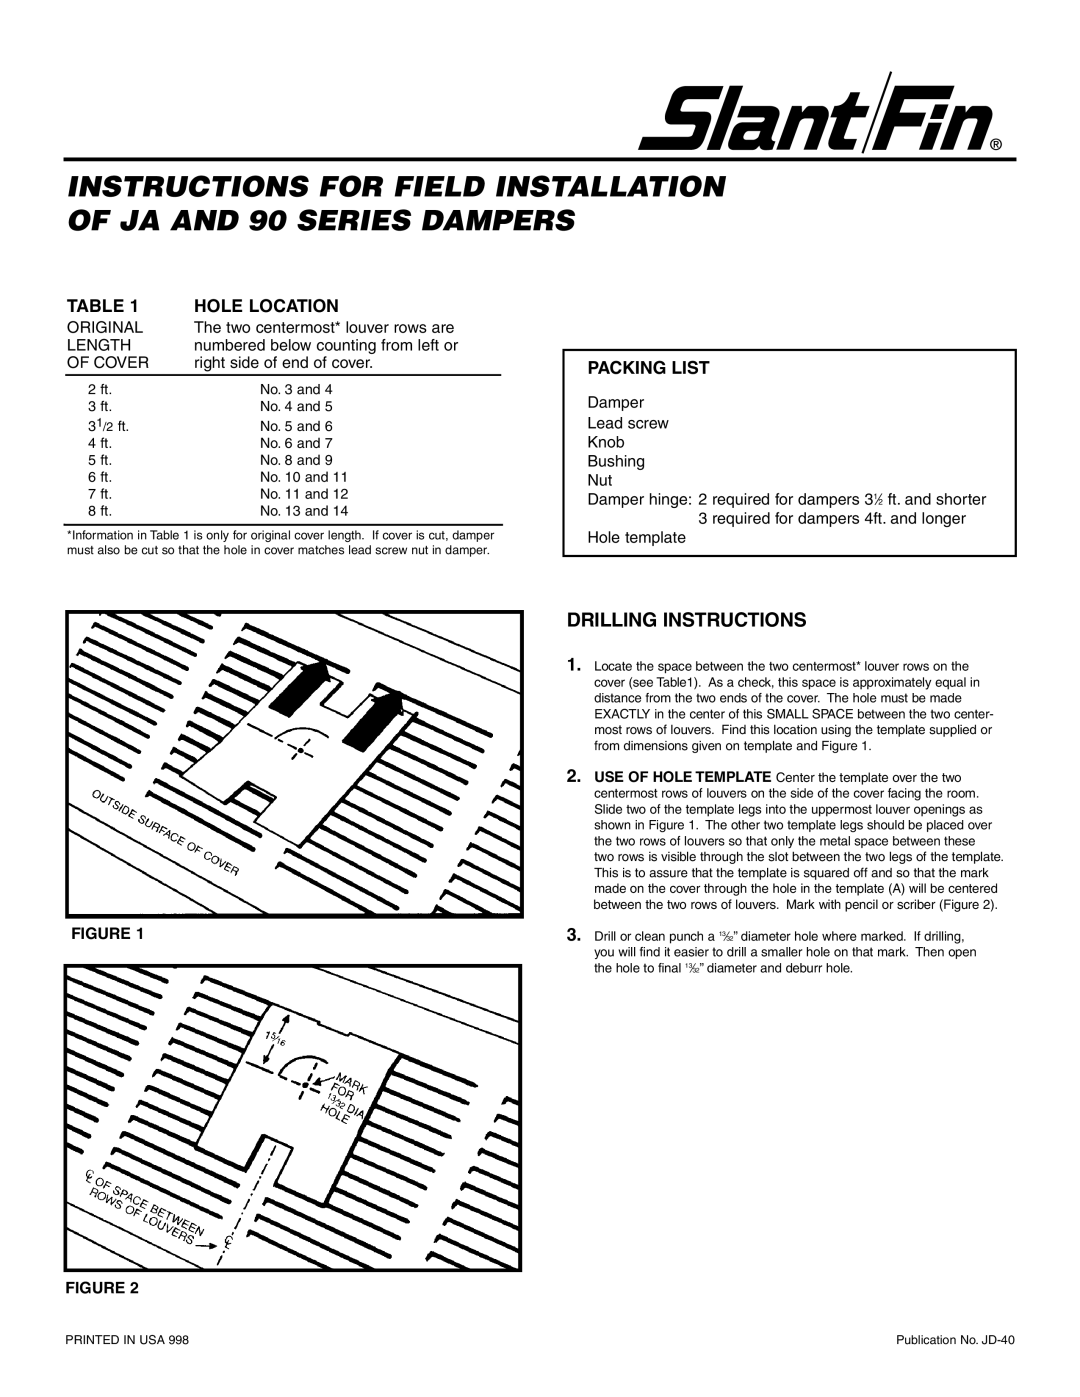 Slant/Fin manual INSTRUCTIONS FOR FIELD INSTALLATION OF JA AND 90 SERIES DAMPERS, Drilling Instructions, Hole Location 